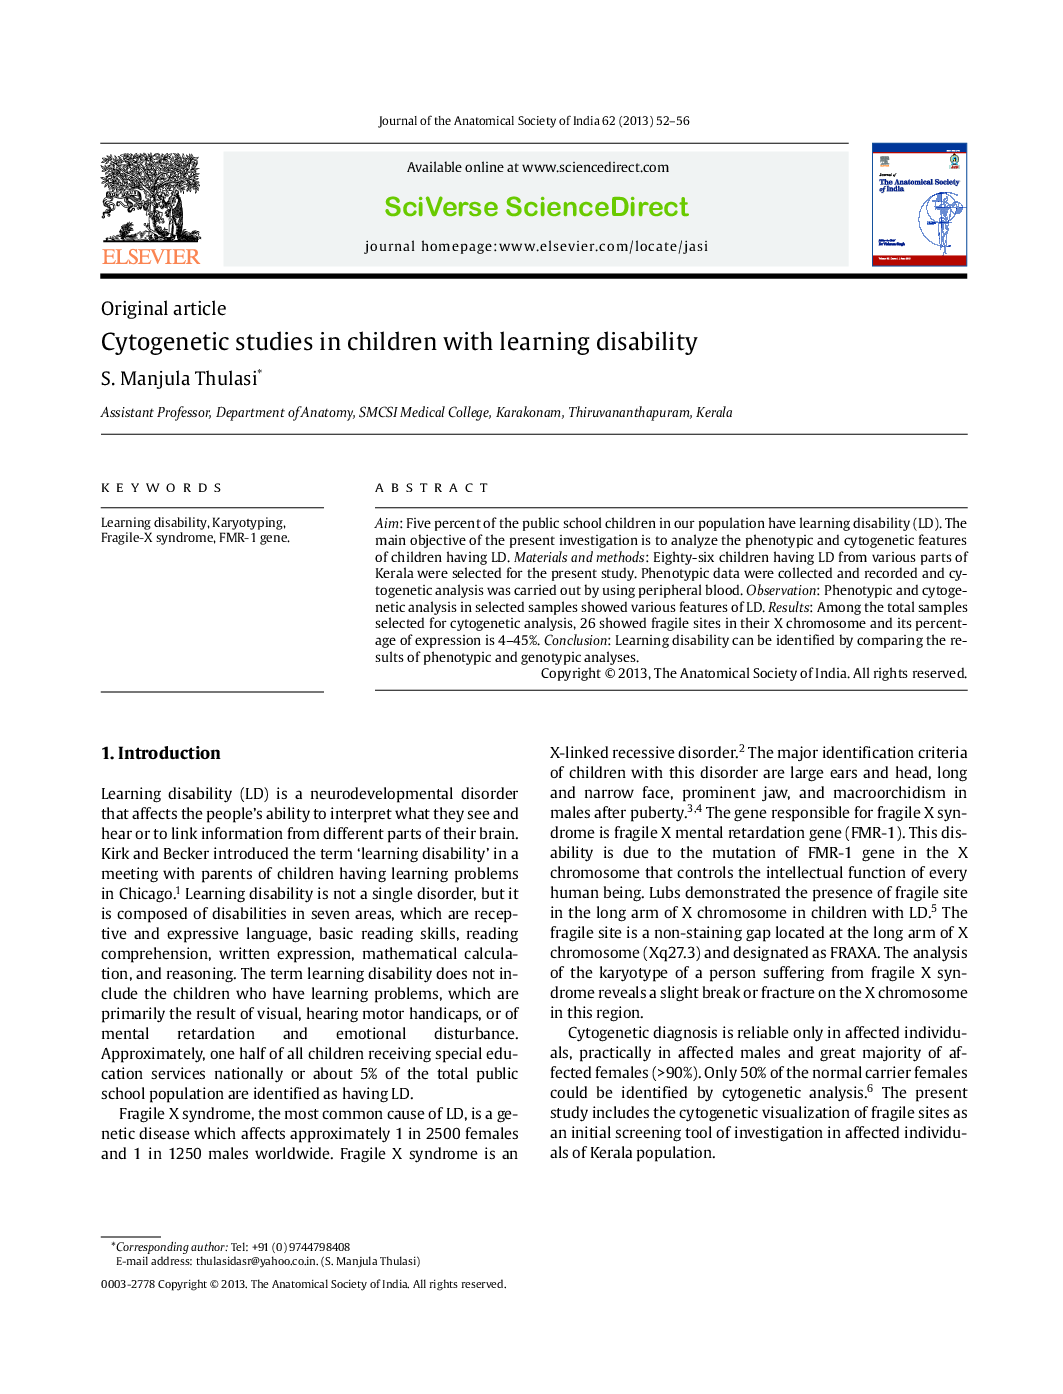 Cytogenetic studies in children with learning disability